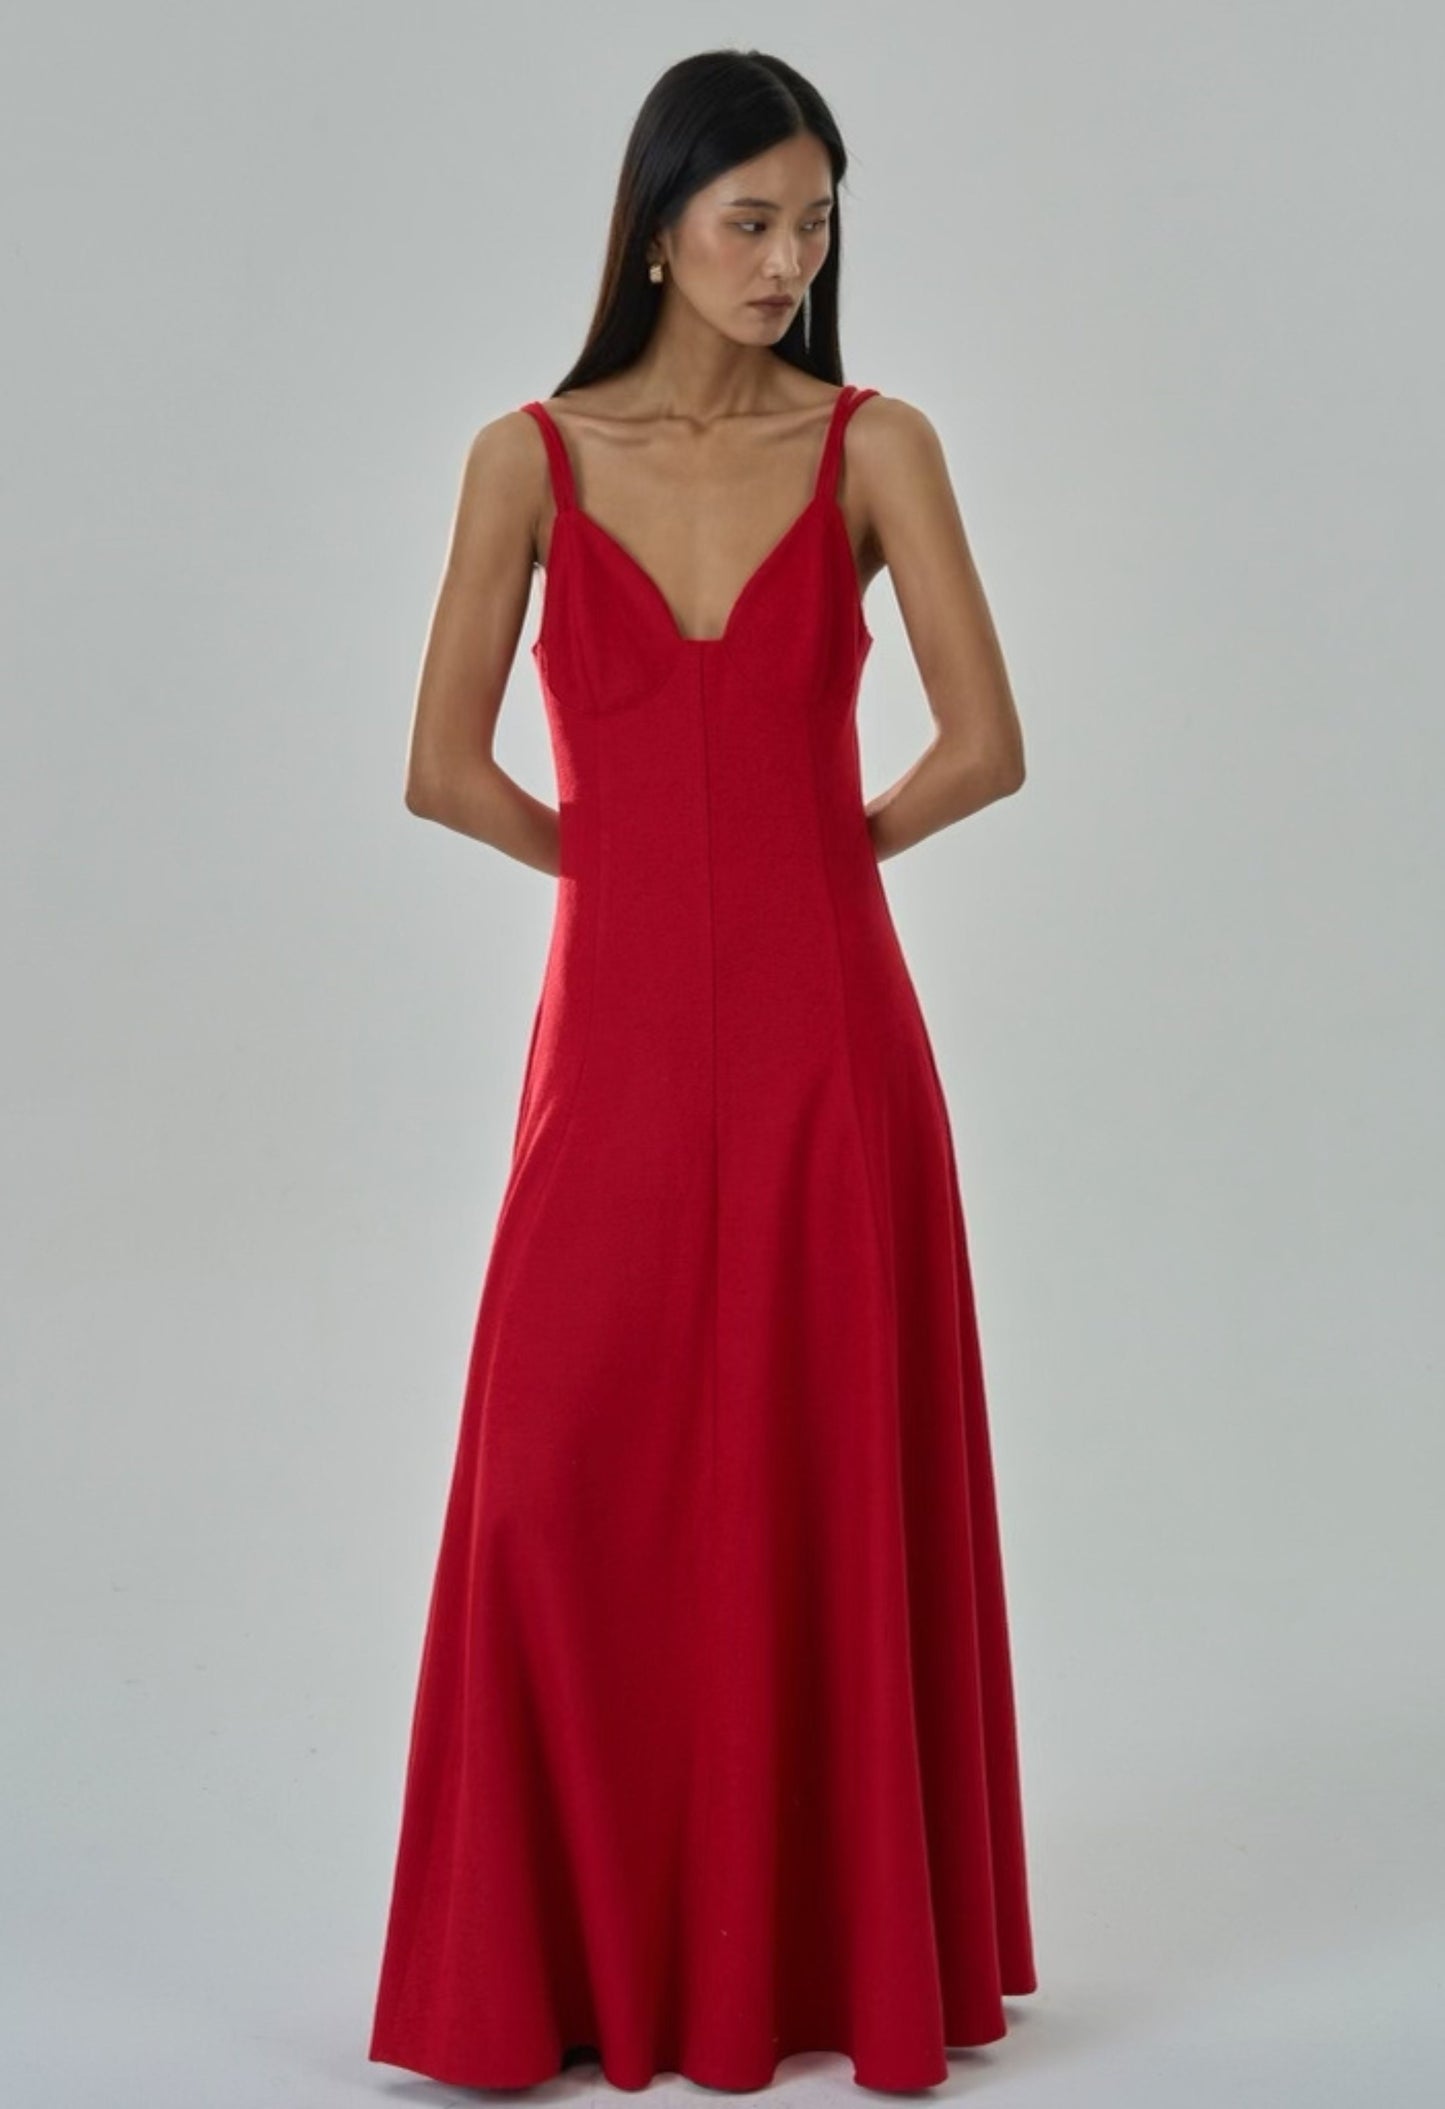 Angelina Wool Dress In Cherry Red